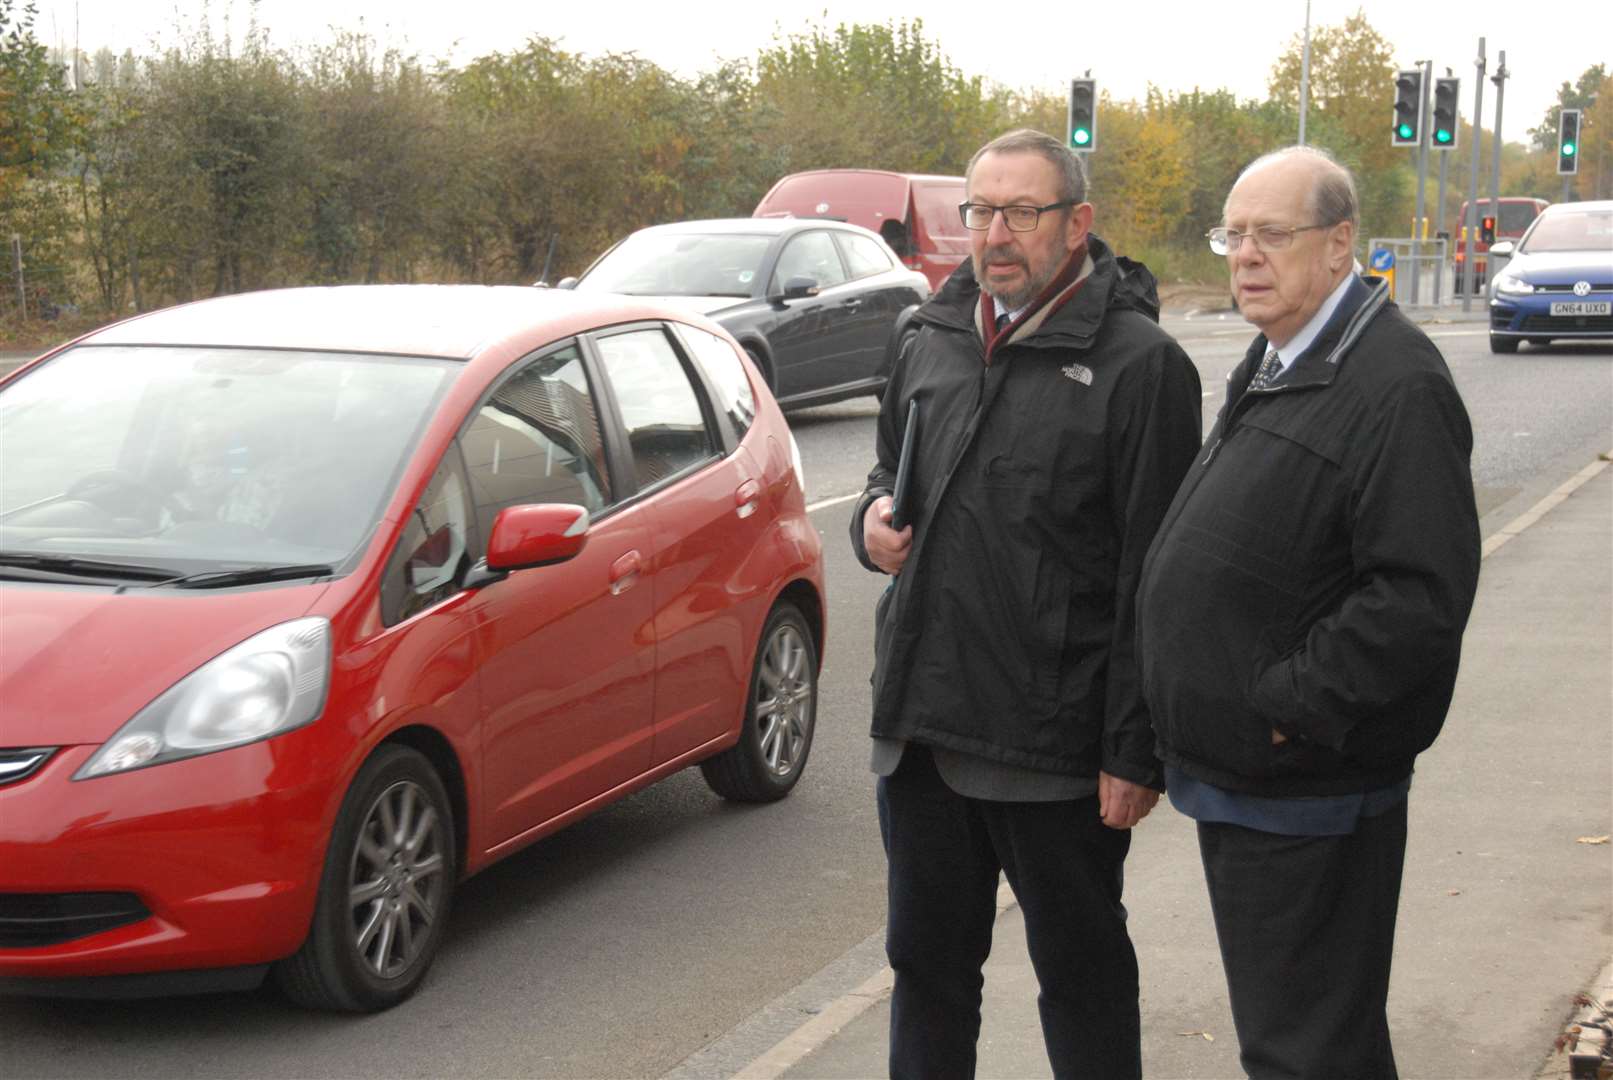 One problem that Cllr Daley and his colleague Cllr Rob Bird was never able to solve - the traffic on Hermitage Lane